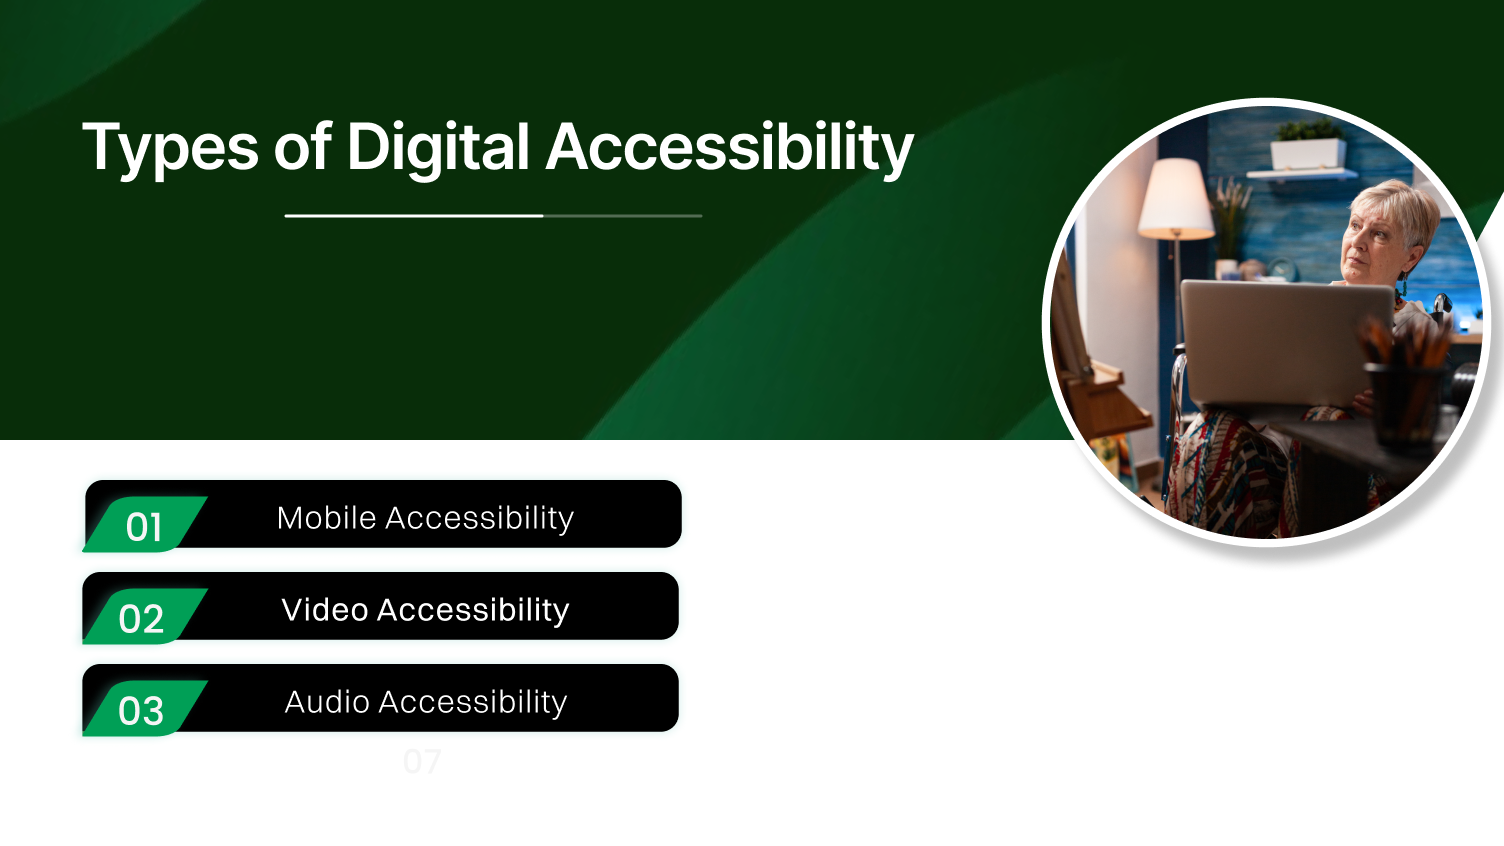 Types of Digital Accessibility